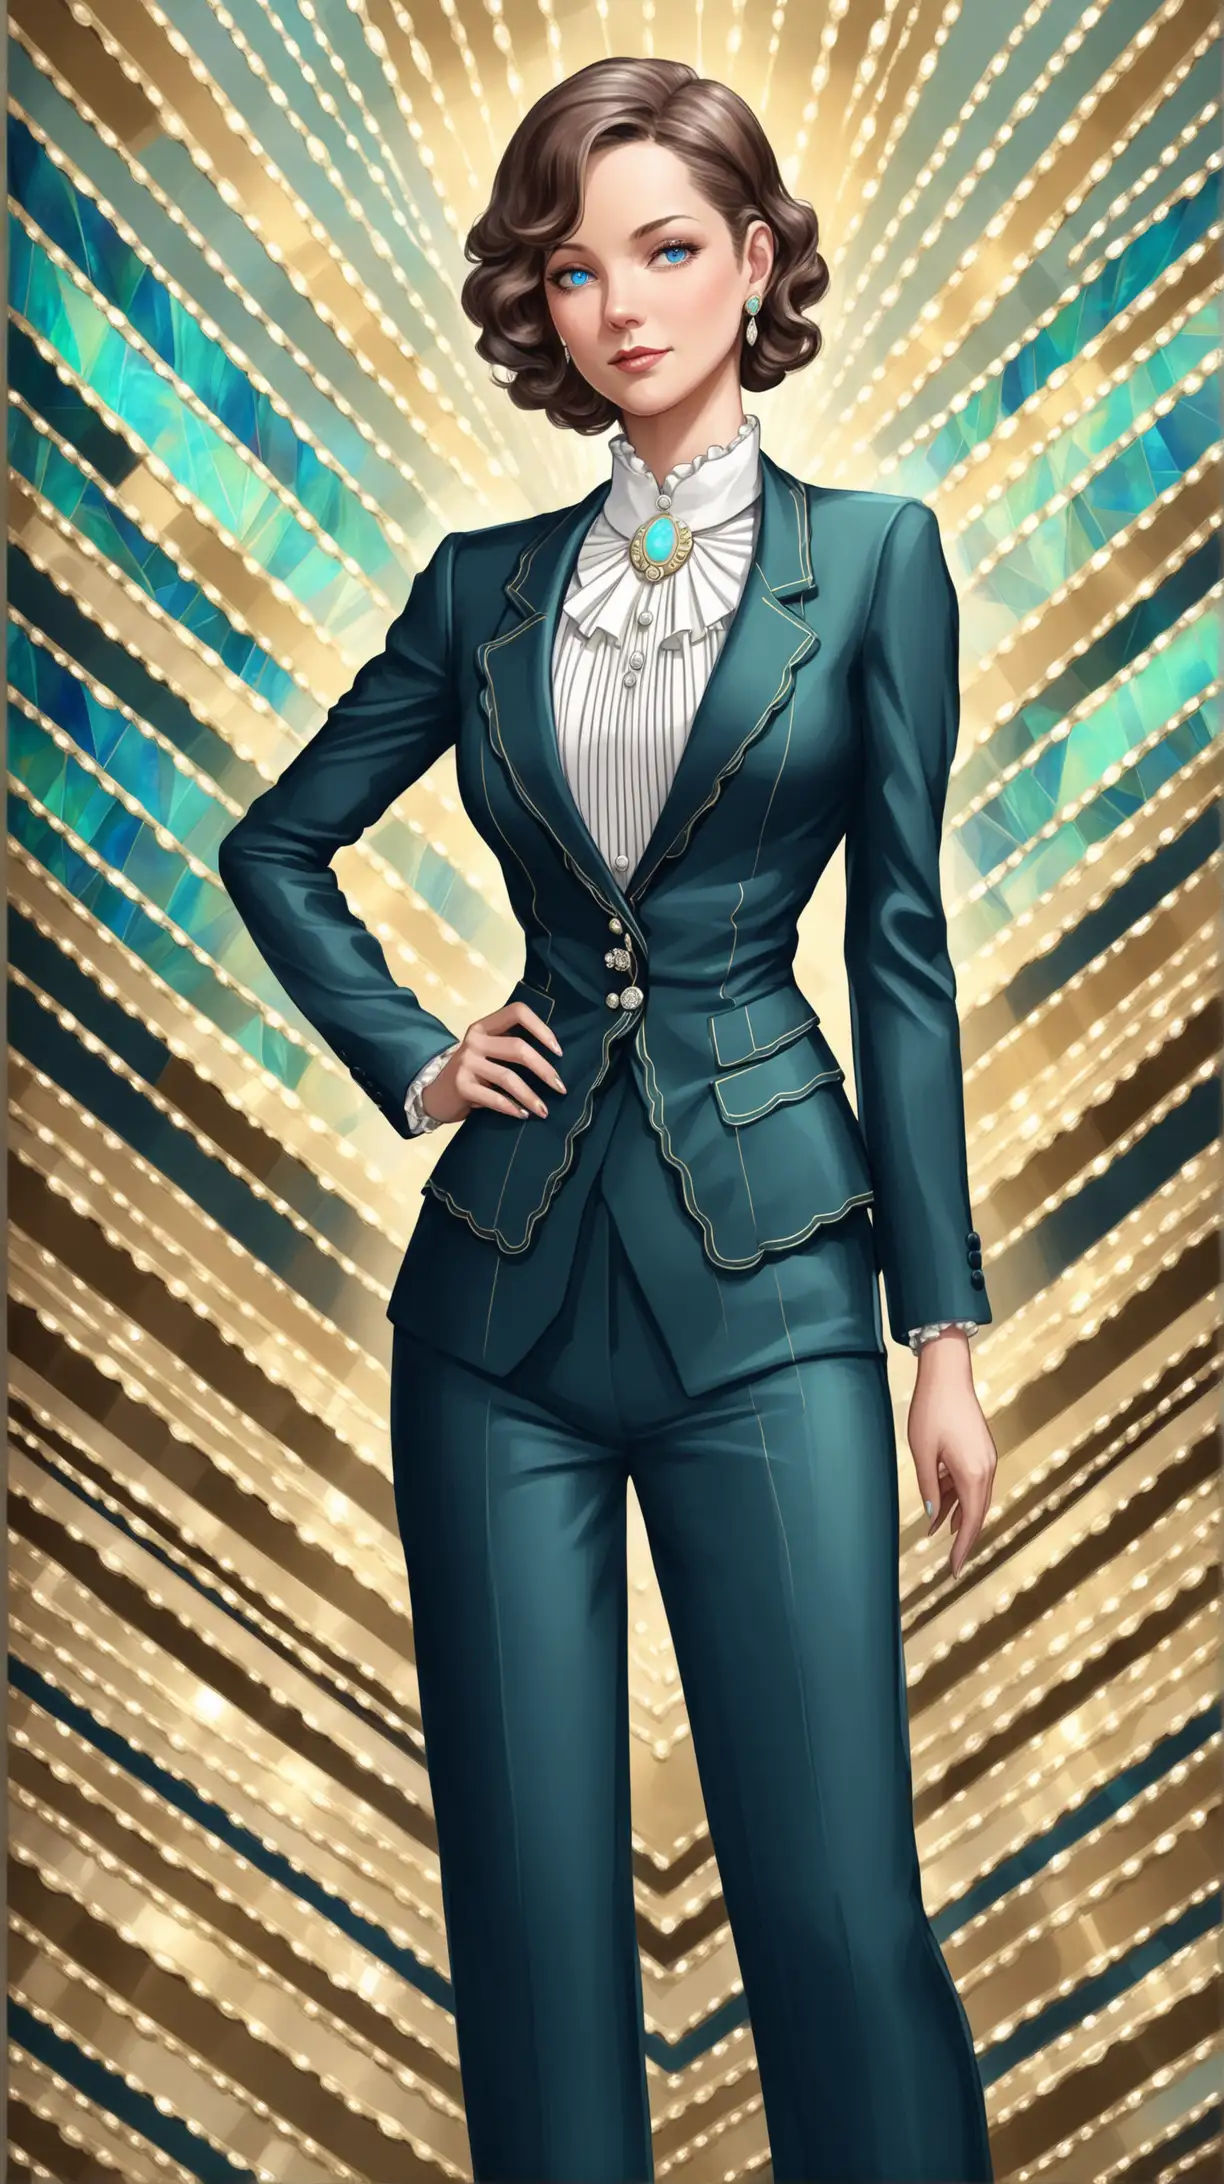 Stylish Female Lawyer in Art Deco Pantsuit with Ruffled Blouse and Opal Jewelry